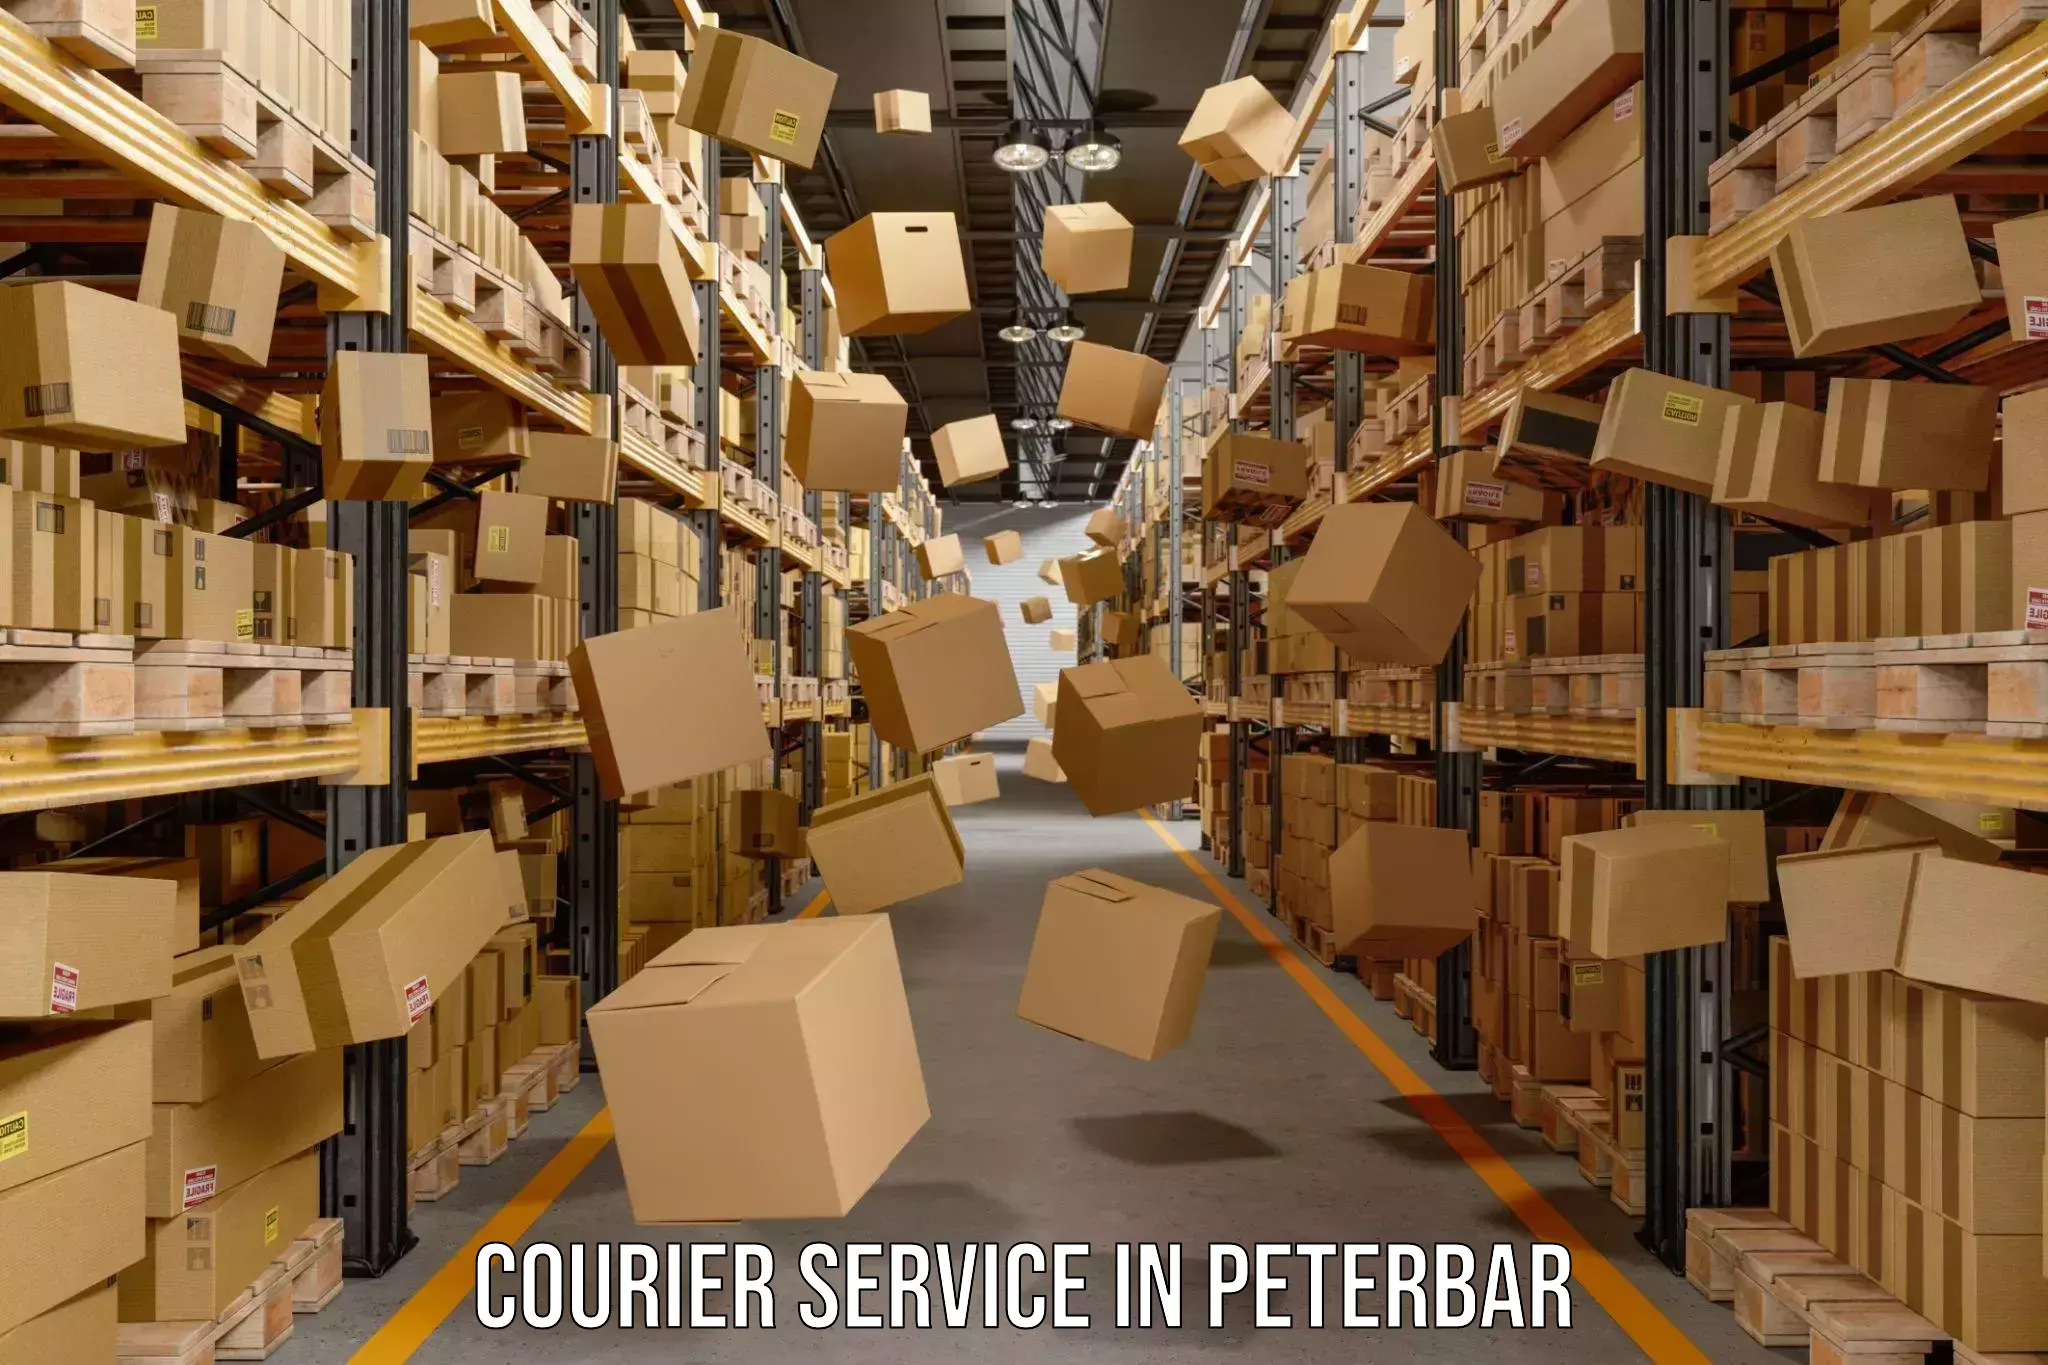 Courier service booking in Peterbar